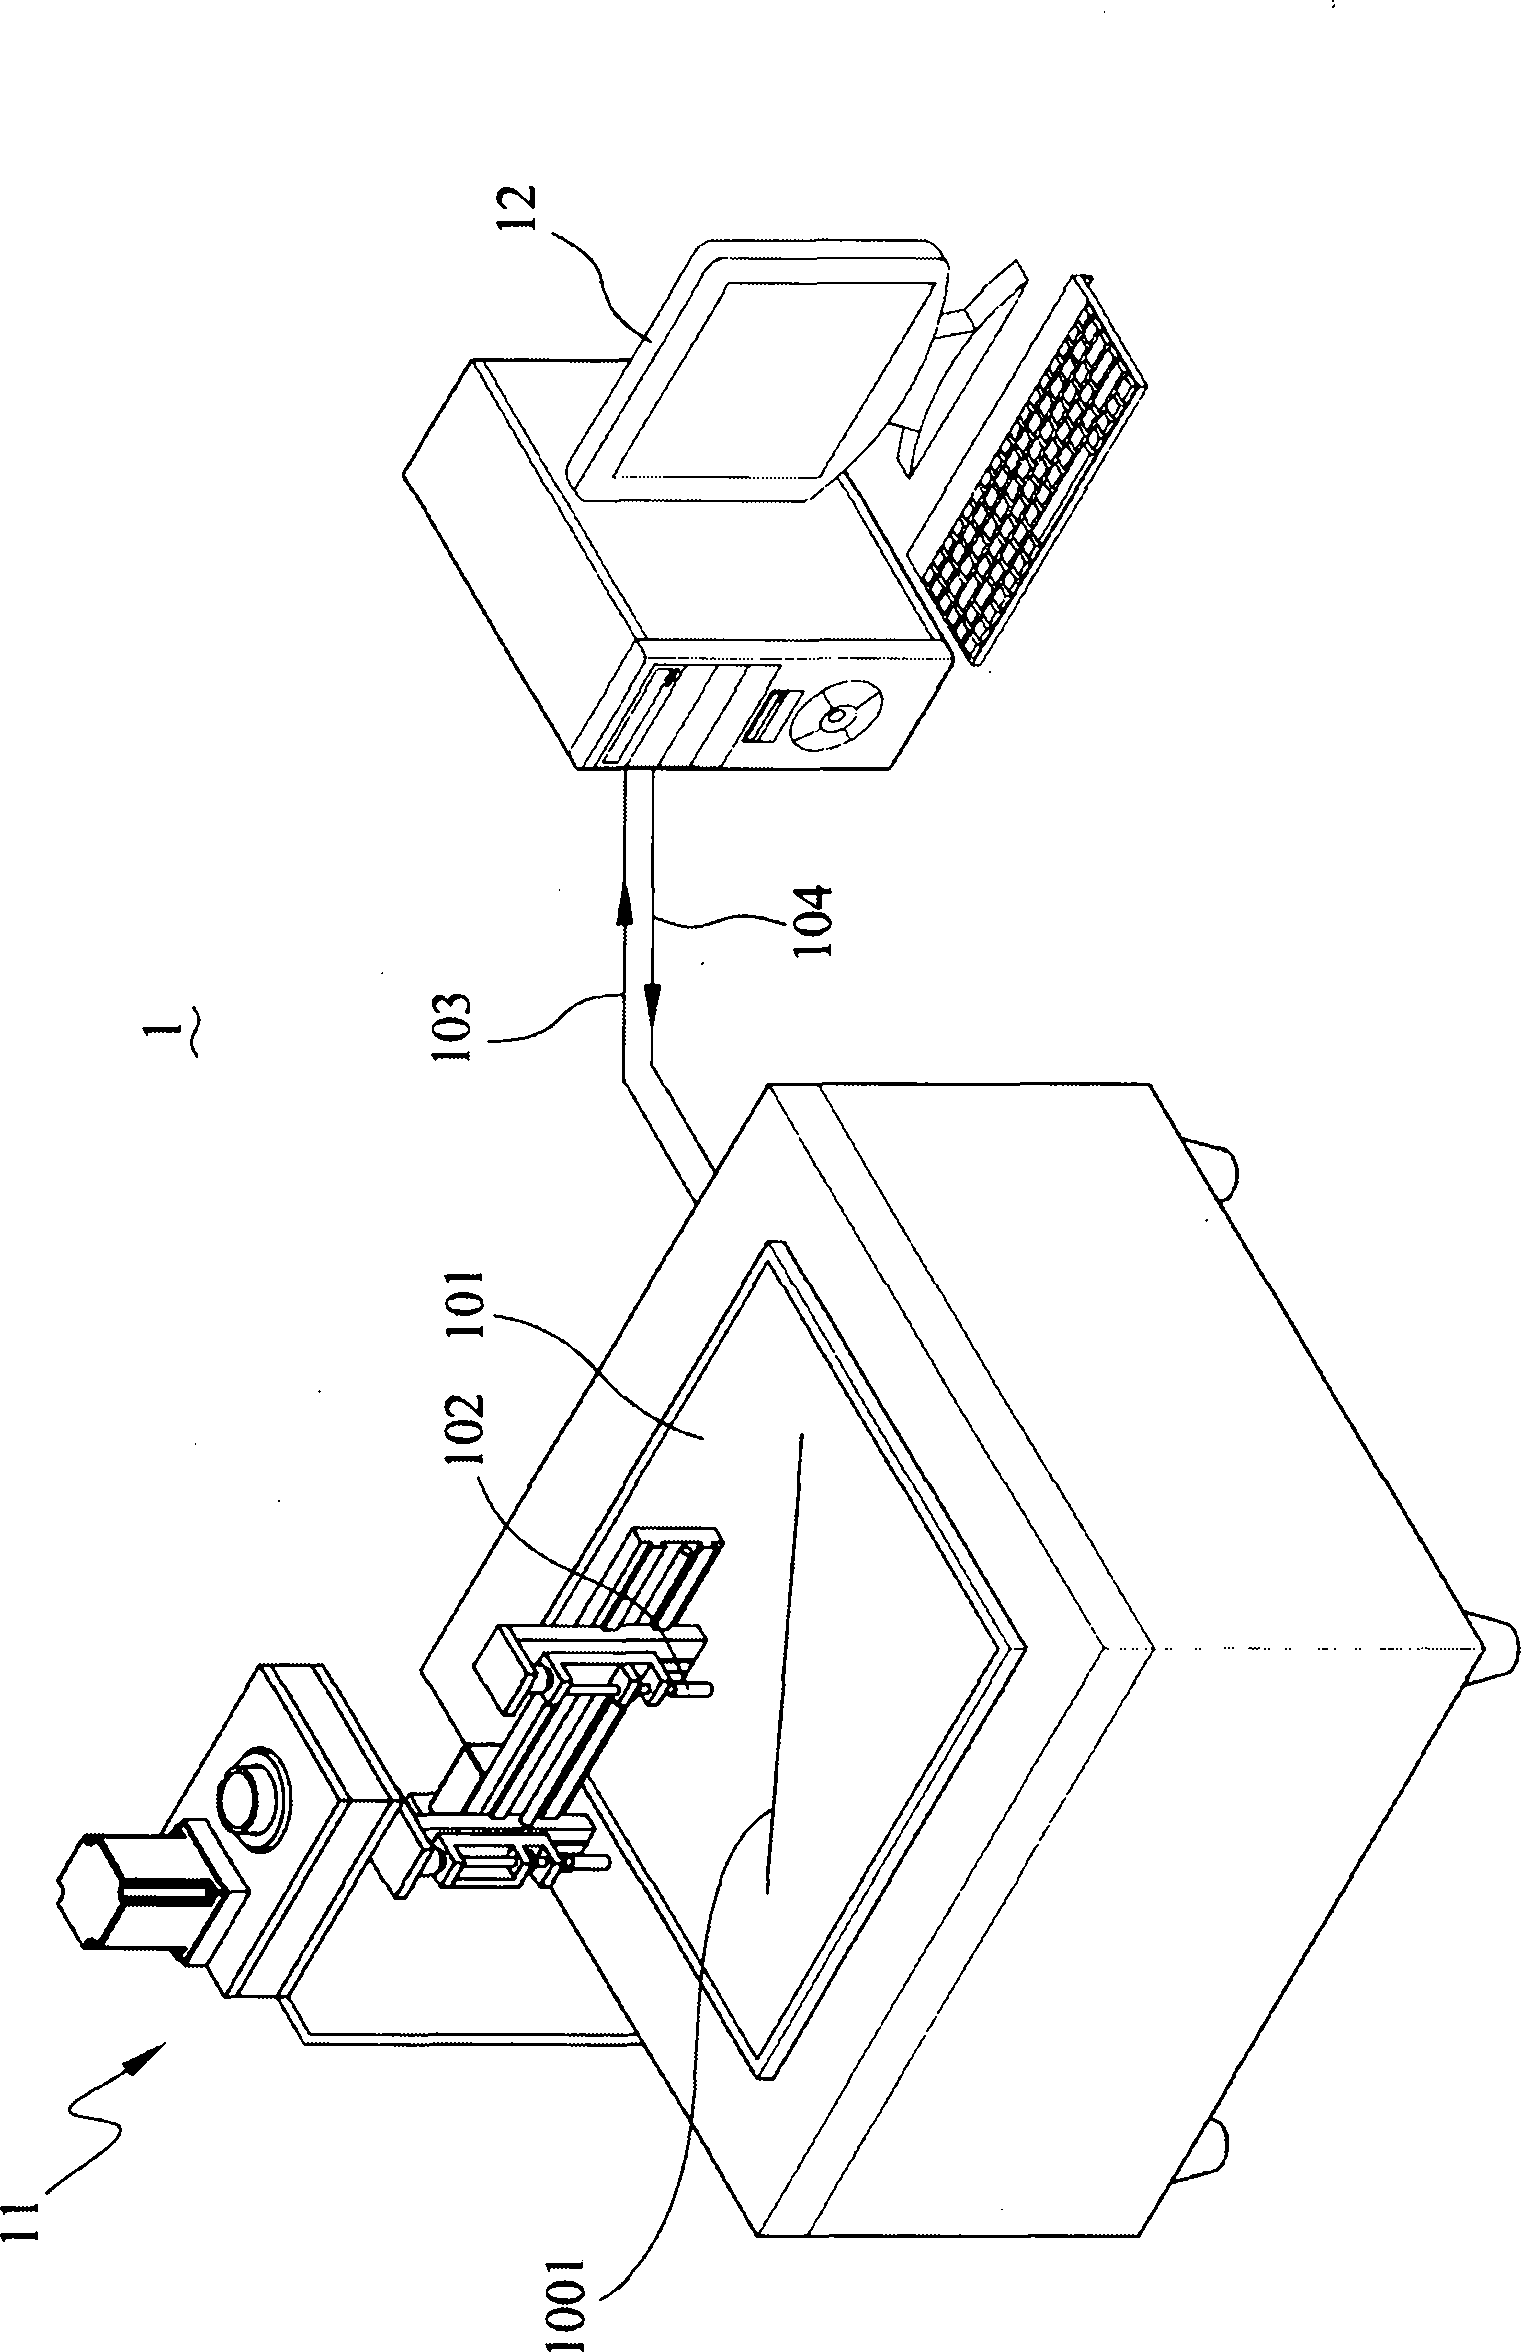 Linearity testing device and method